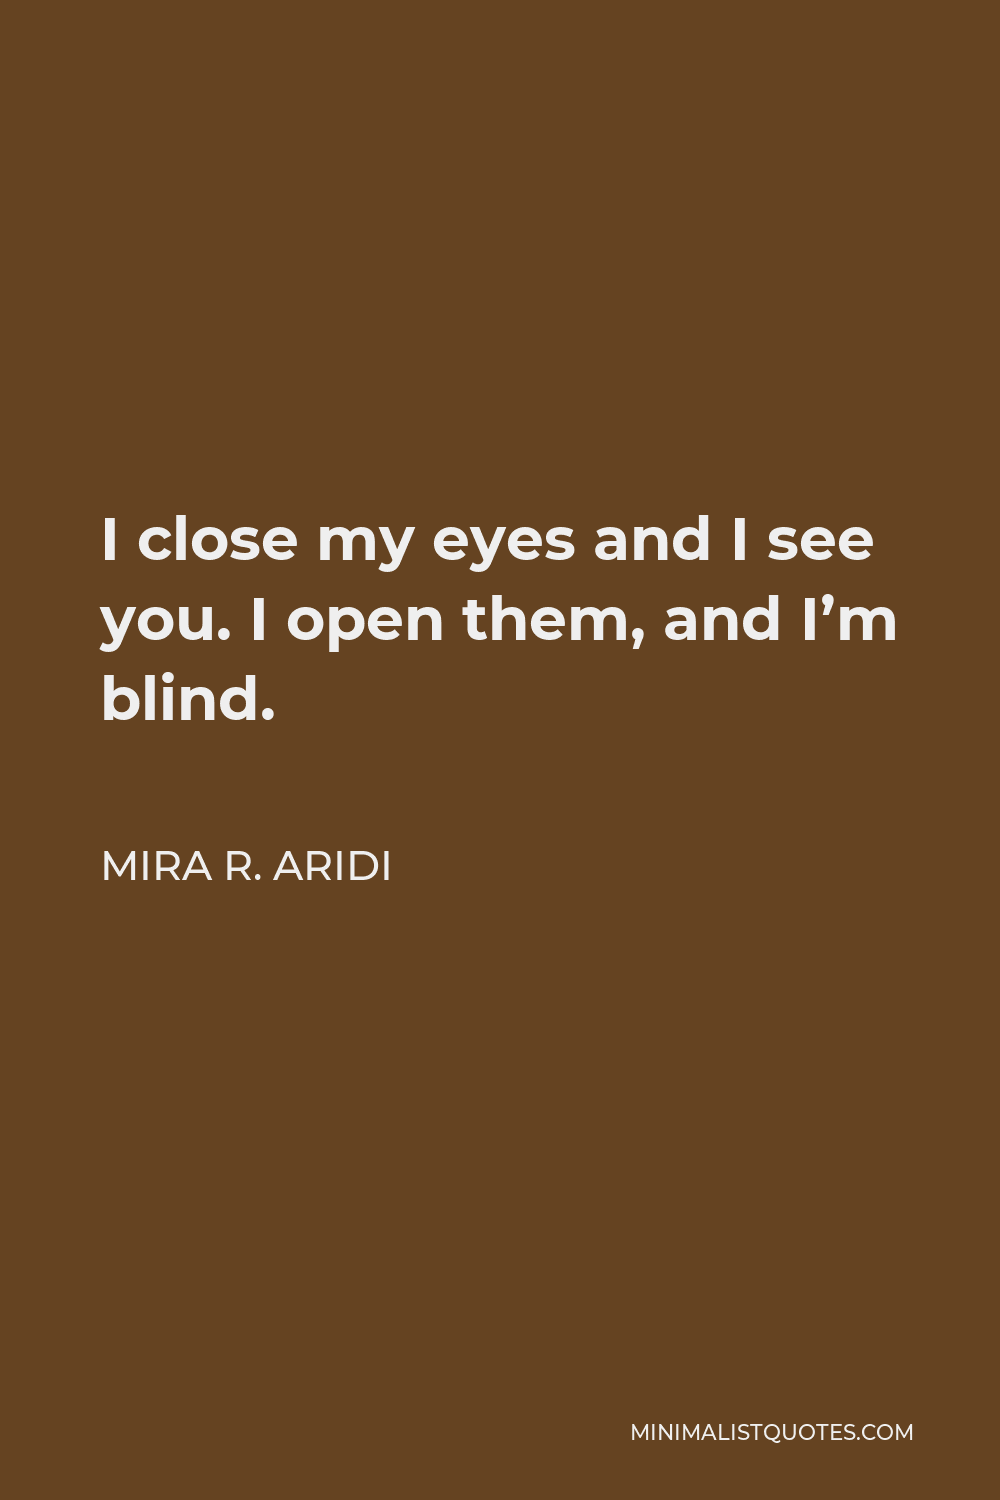 Mira R. Aridi Quote - I close my eyes and I see you. I open them, and I’m blind.